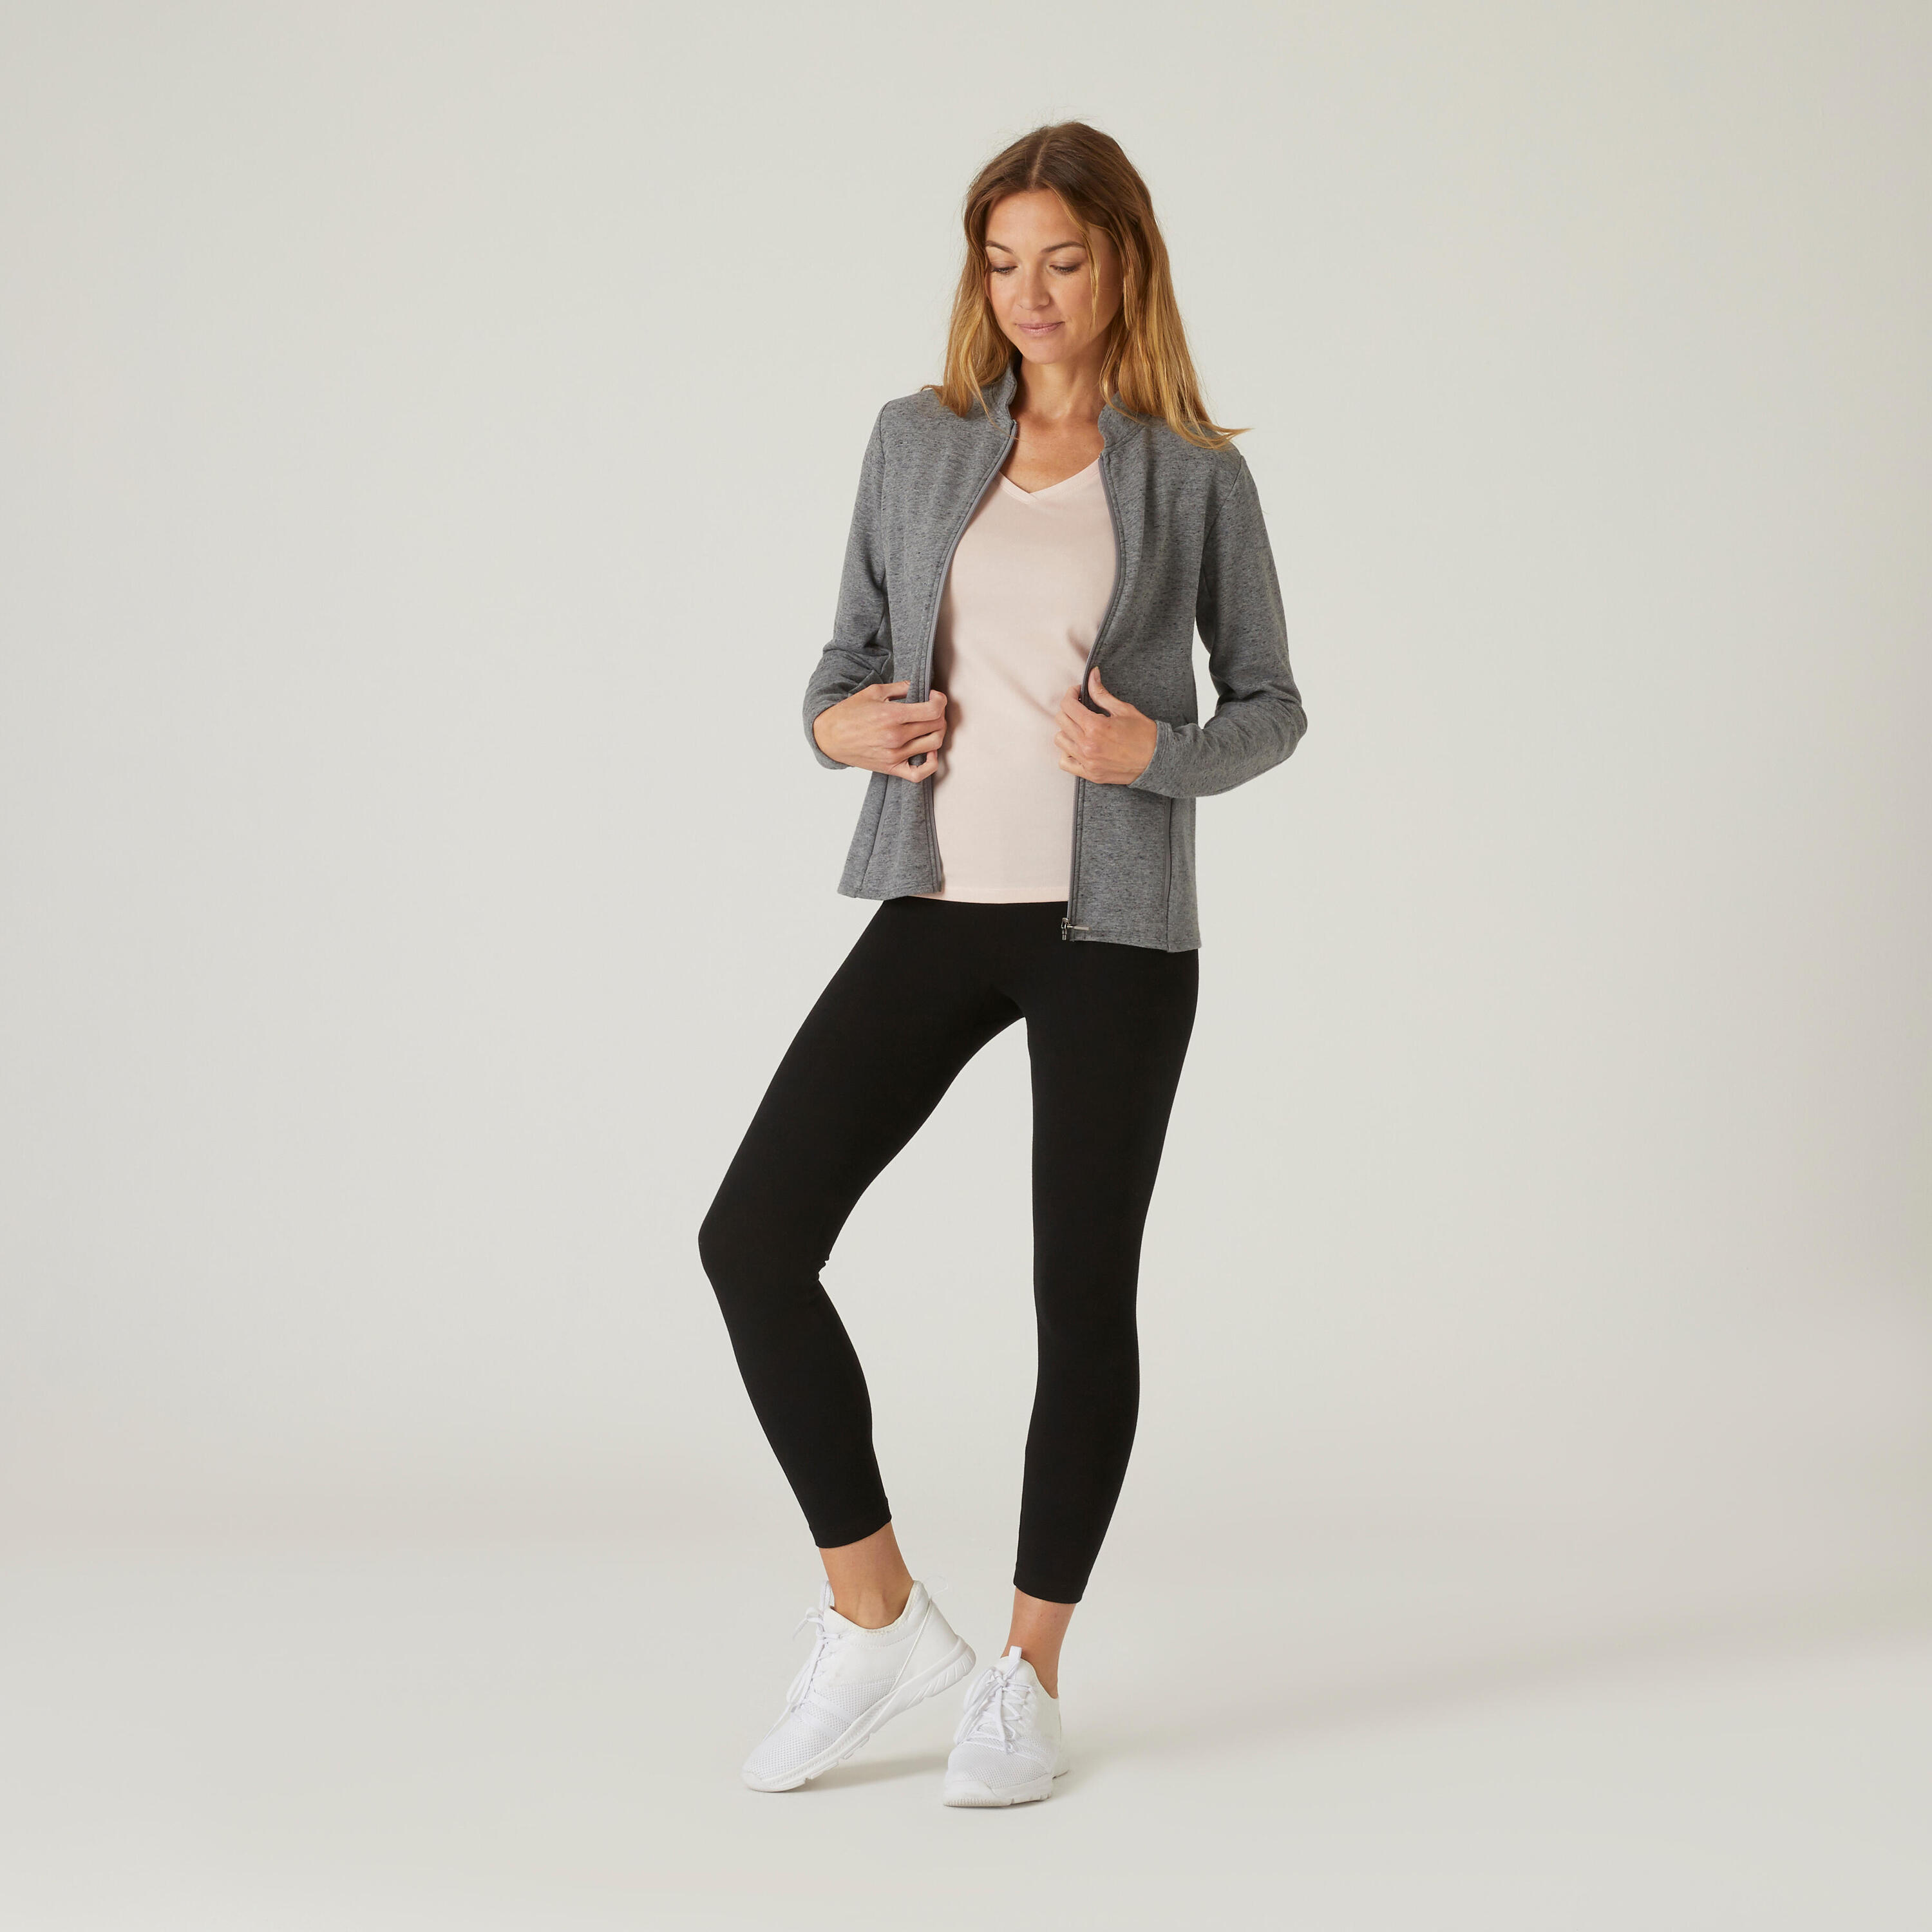 Women's Fitted High Neck Zipped Sweatshirt With Pocket 520 - Grey 3/7